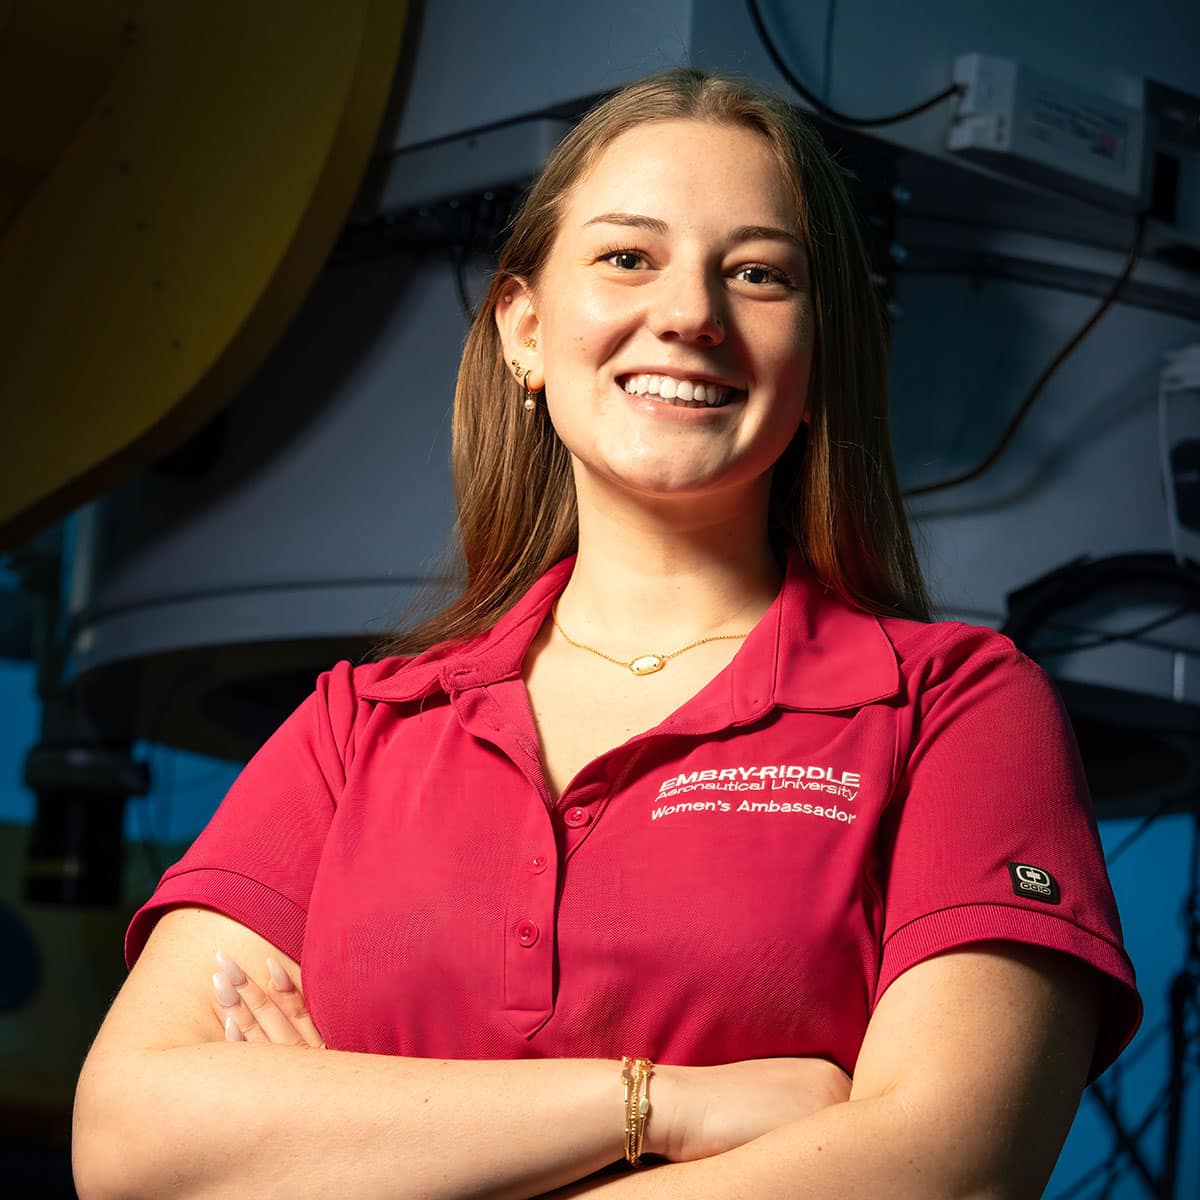 Logan Price pursues her passion in the STEM field through on-campus involvement and internship opportunities as she balances two majors. (Photo: Embry‑Riddle / Bill Fredette-Huffman)